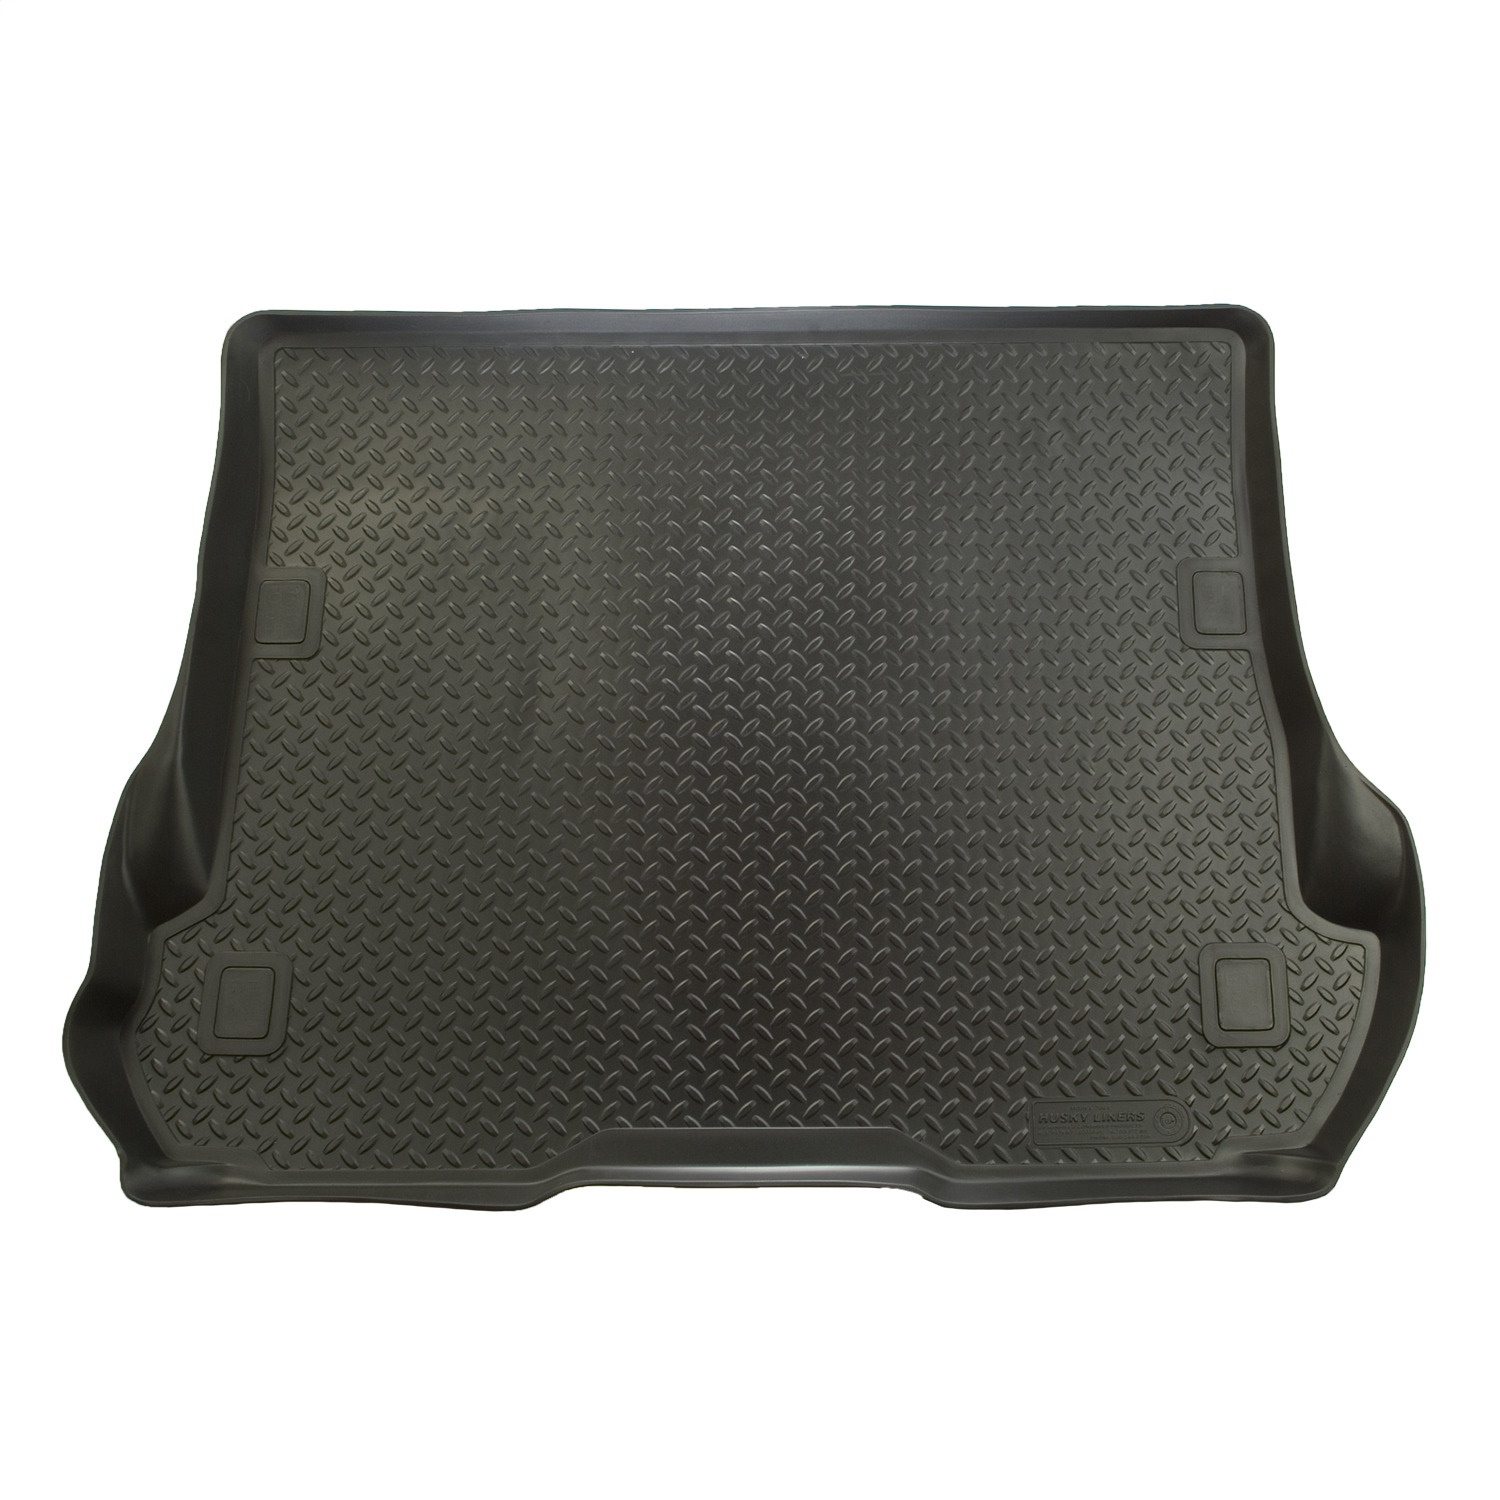 Husky Liners Husky Liners 25881 Classic Style; Cargo Liner Fits 08-13 Highlander